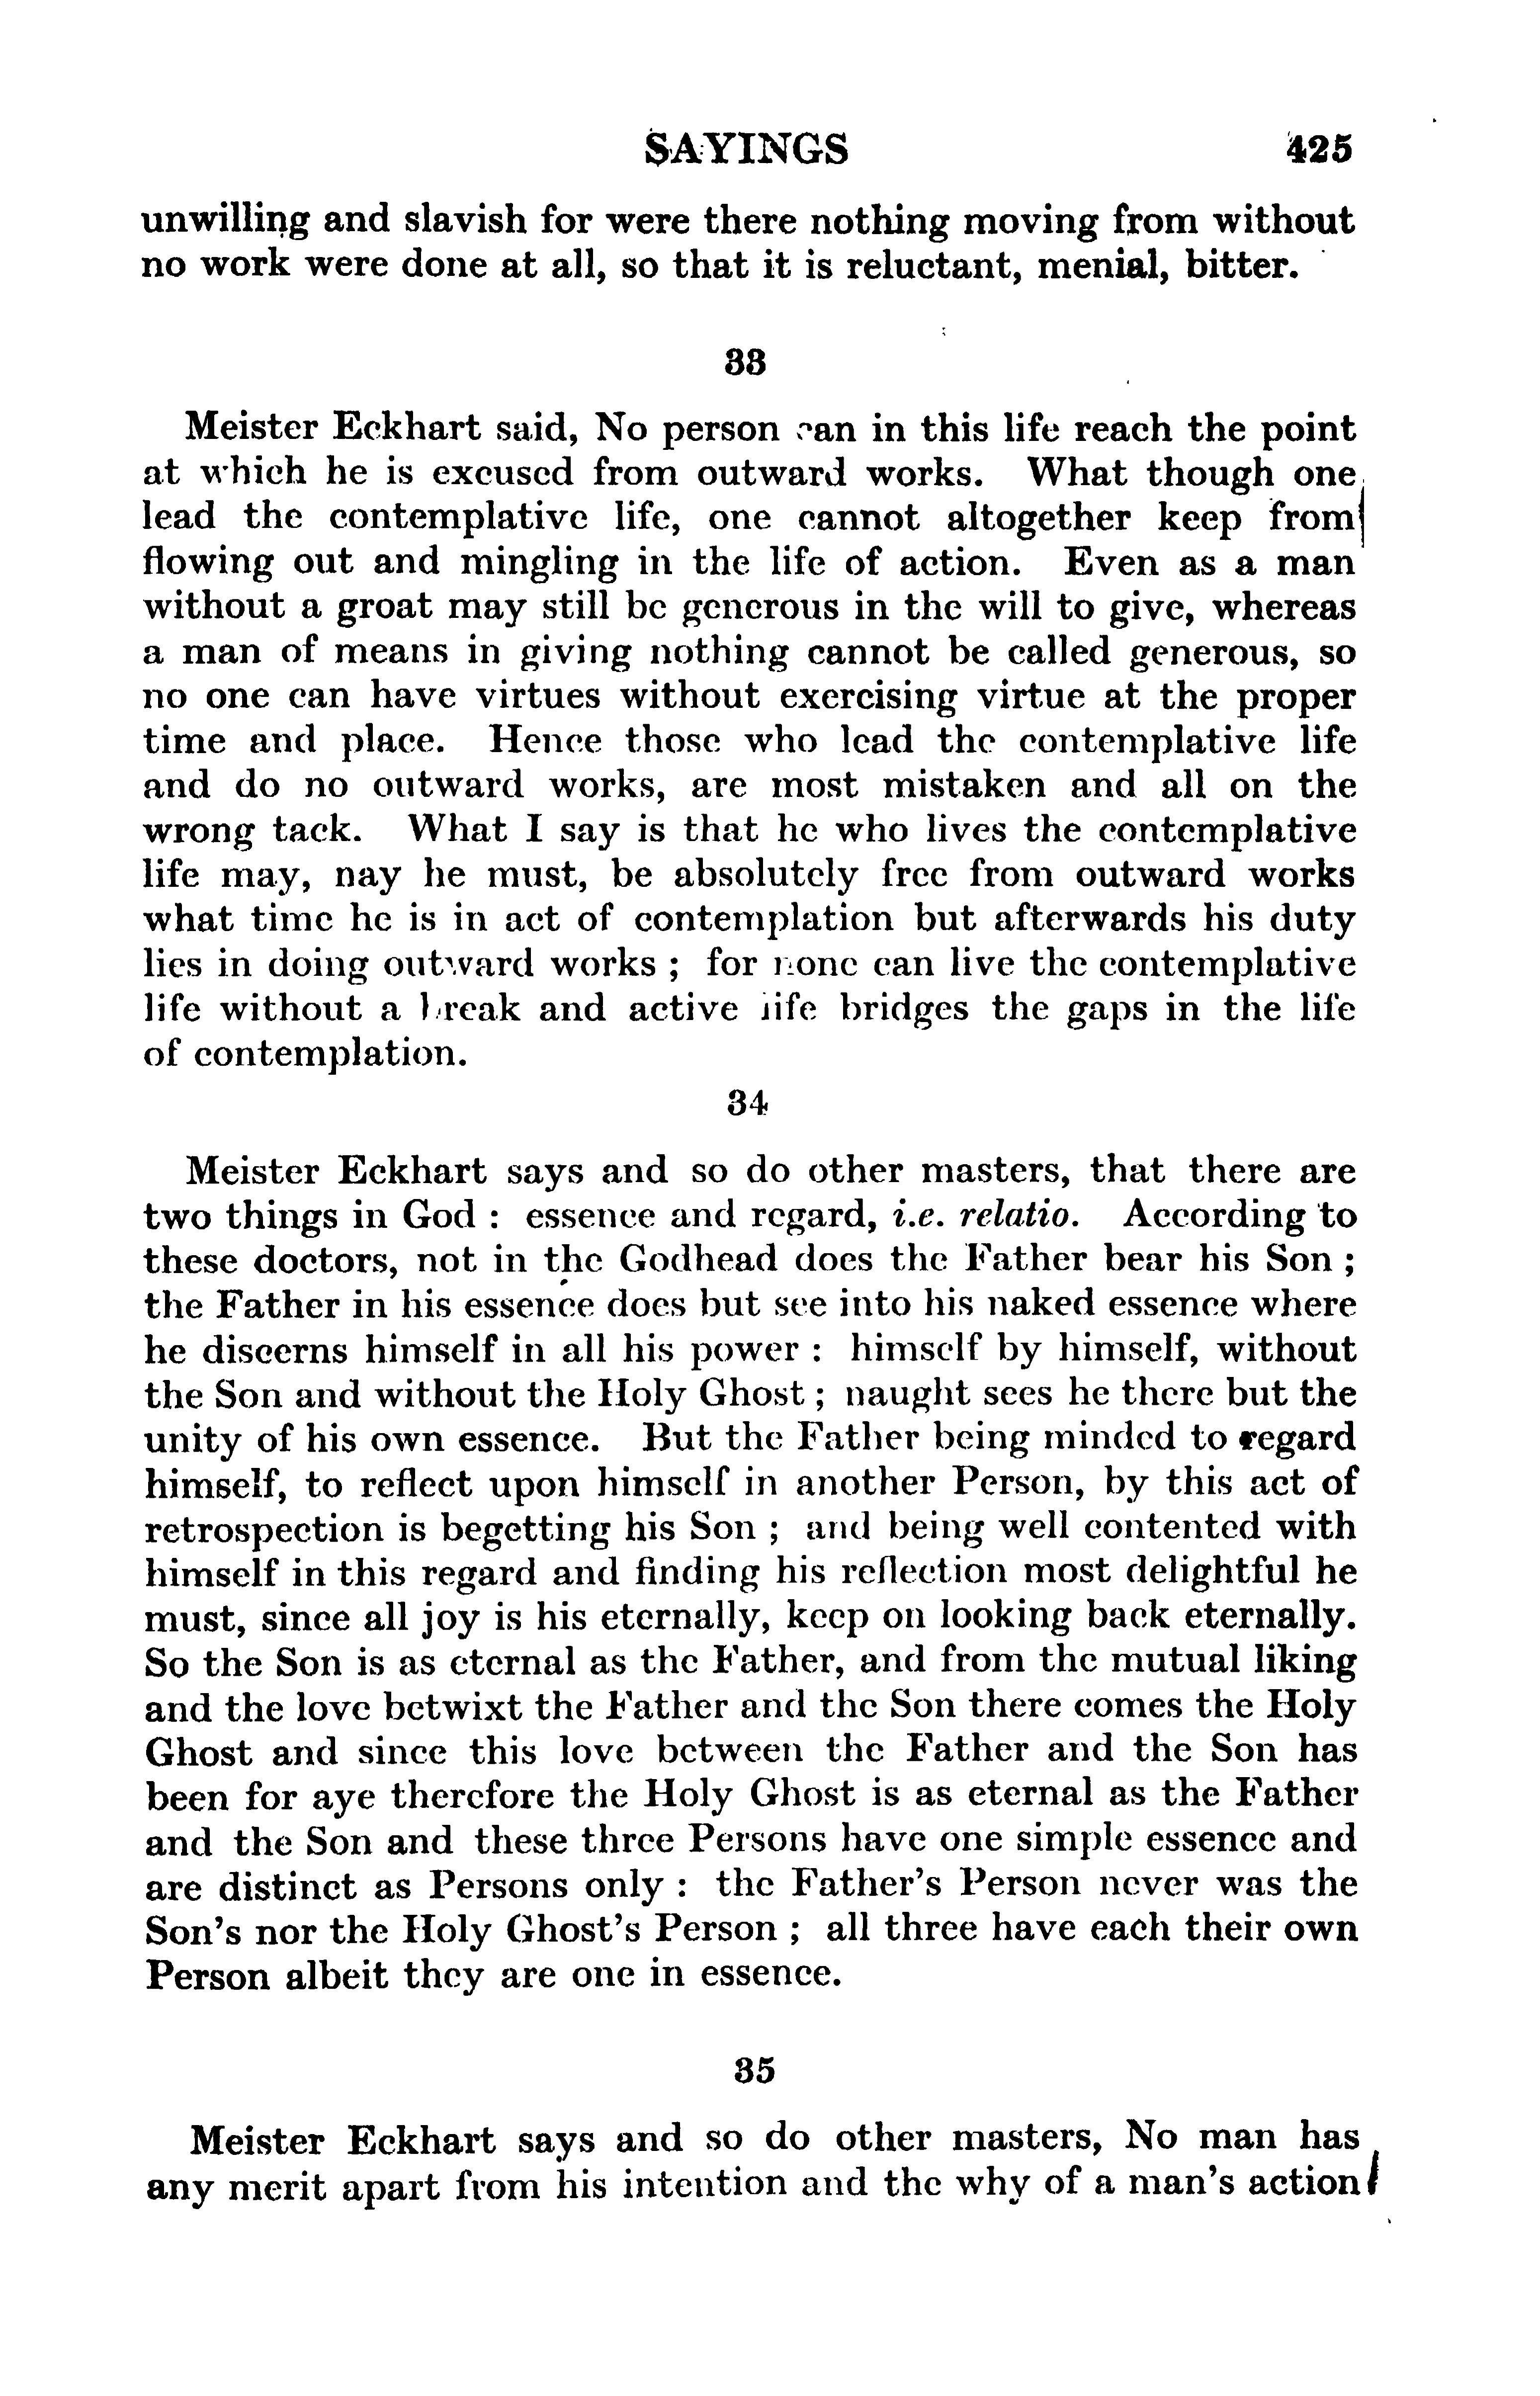 Image of page 0449